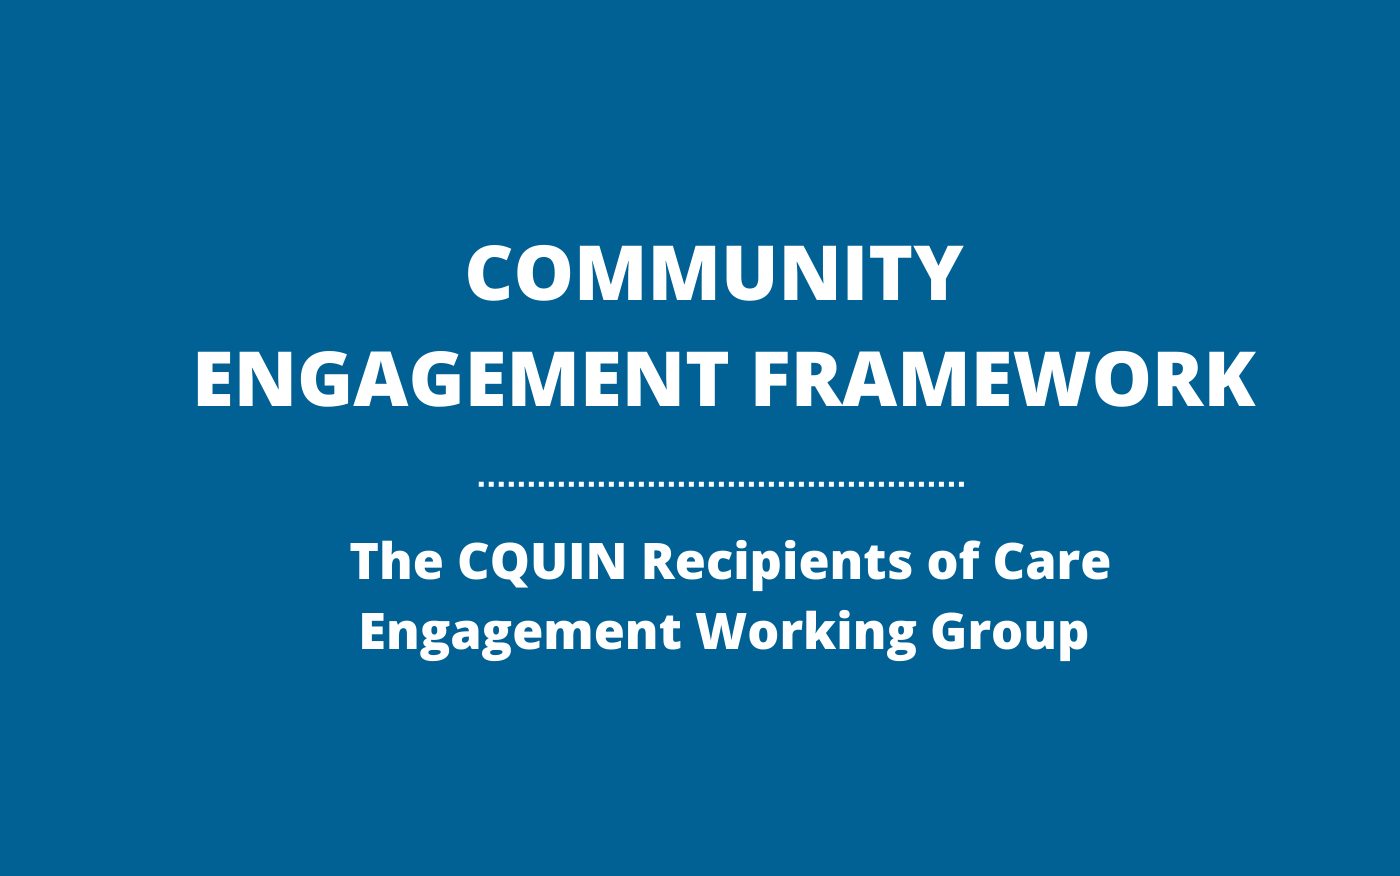 _The CQUIN Recipients of Care Engagement Working Group